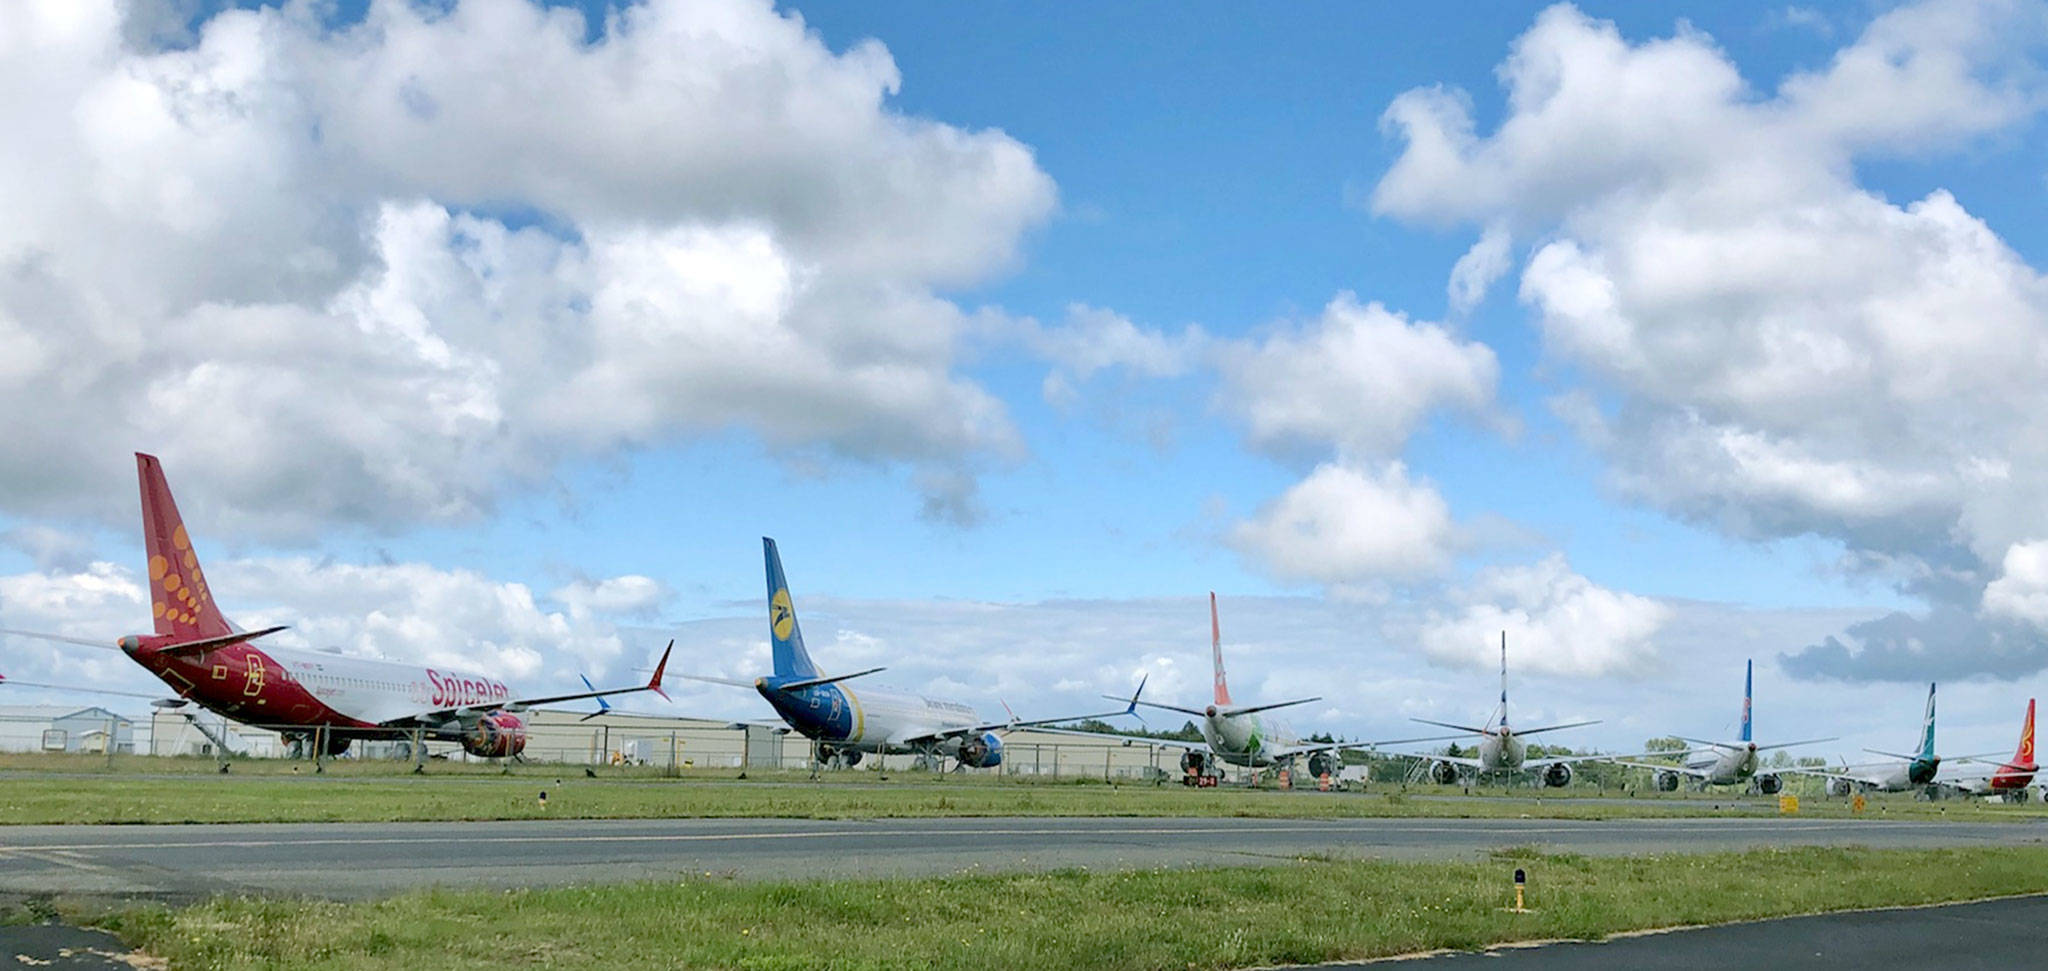 Boeing 737 Max airplanes are parked on the crosswind runway at Paine Field in Everett on June 6, 2019. (Janice Podsada / The Herald)